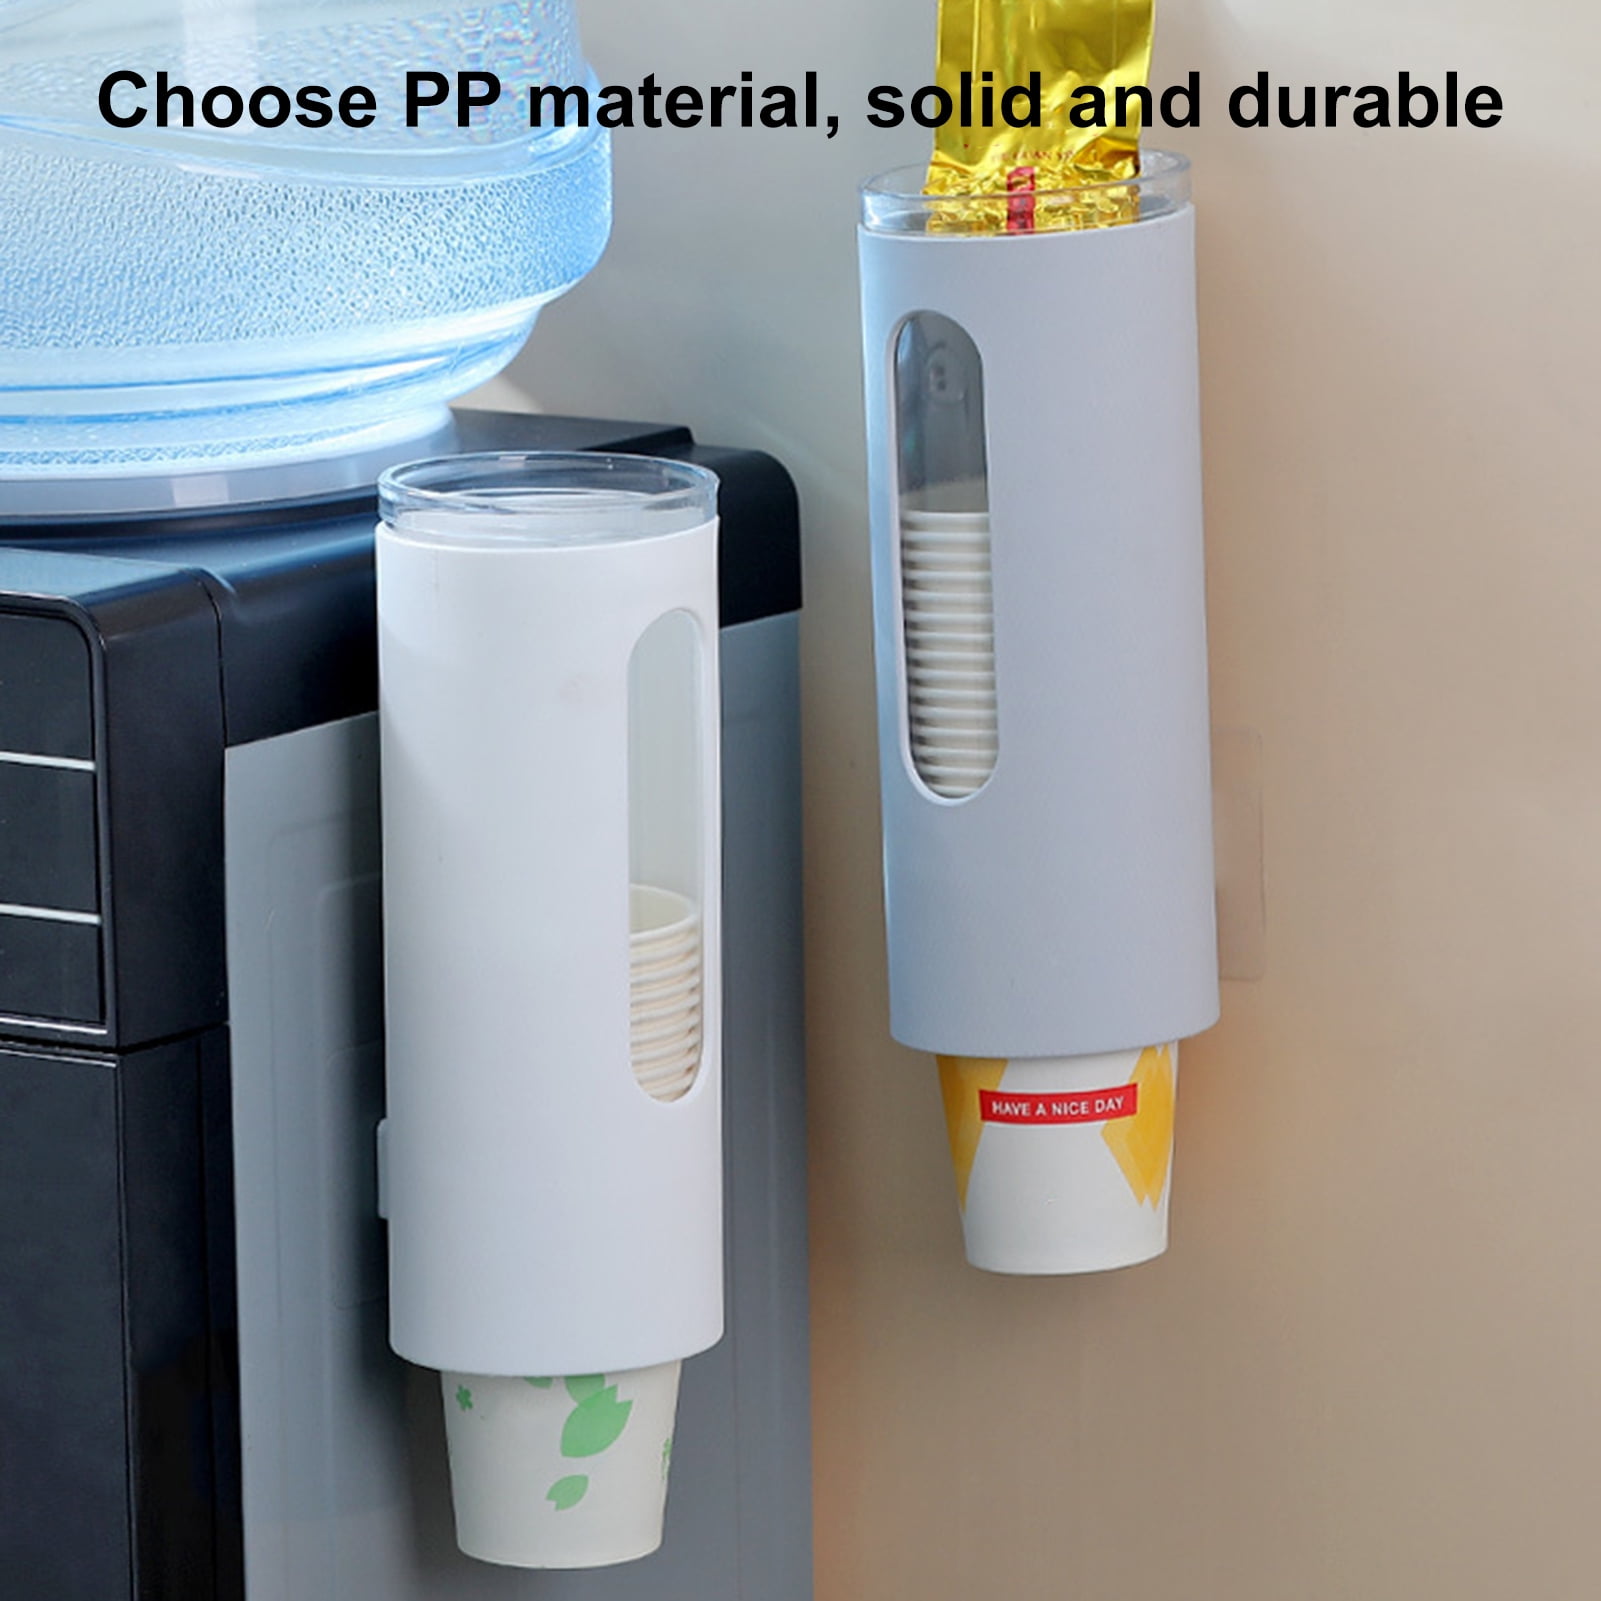 Storage H Details about   mDesign Modern Plastic Compact Small Disposable Paper Cup Dispenser